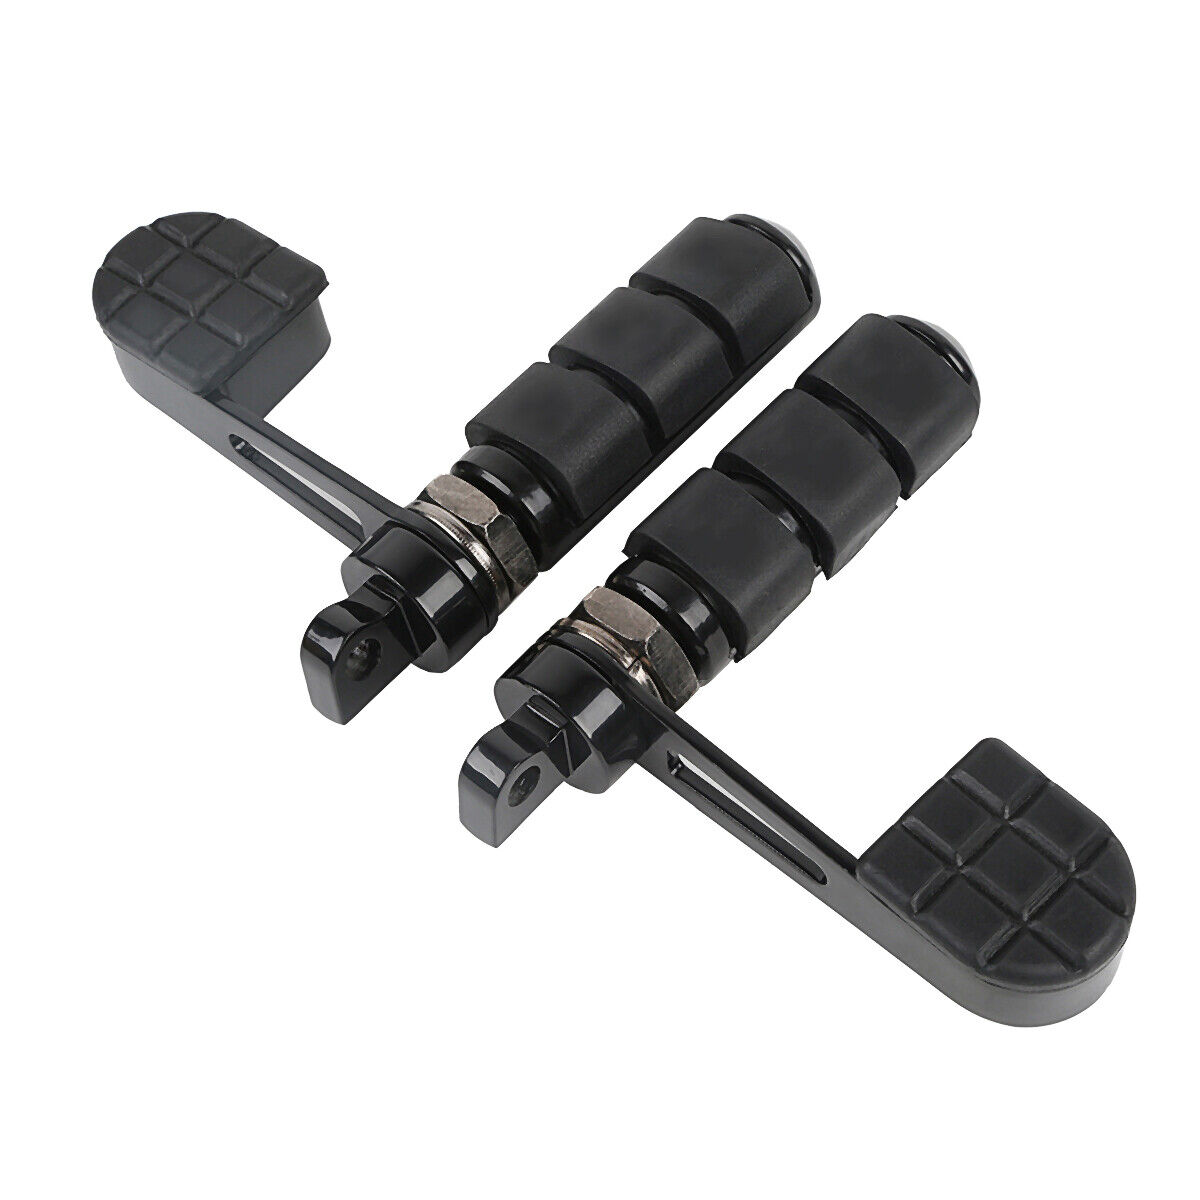 Anti Vibration Stirrup Heel Foot FootPegs Fit For Harley Softail Sportster Black